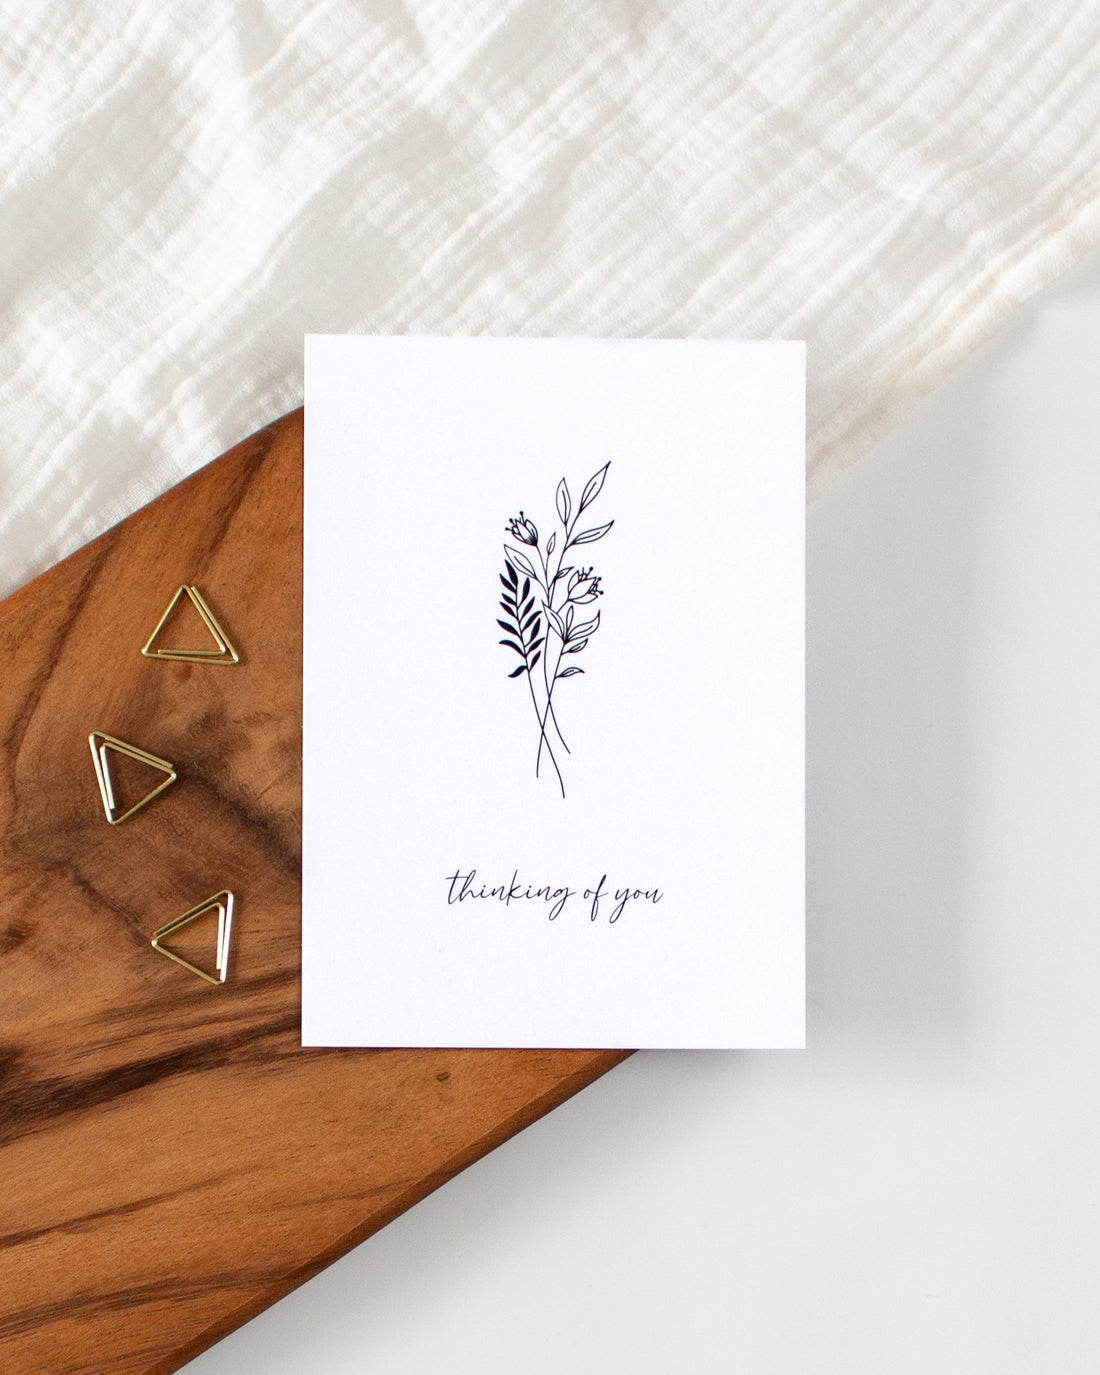 A postcard laying on a wooden board with some golden triangle paperclips and a white cloth in the background. The postcard design shows a line art drawing of some flowers and leaves with a line of cursive writing below, that says &quot;thinking of you&quot;.